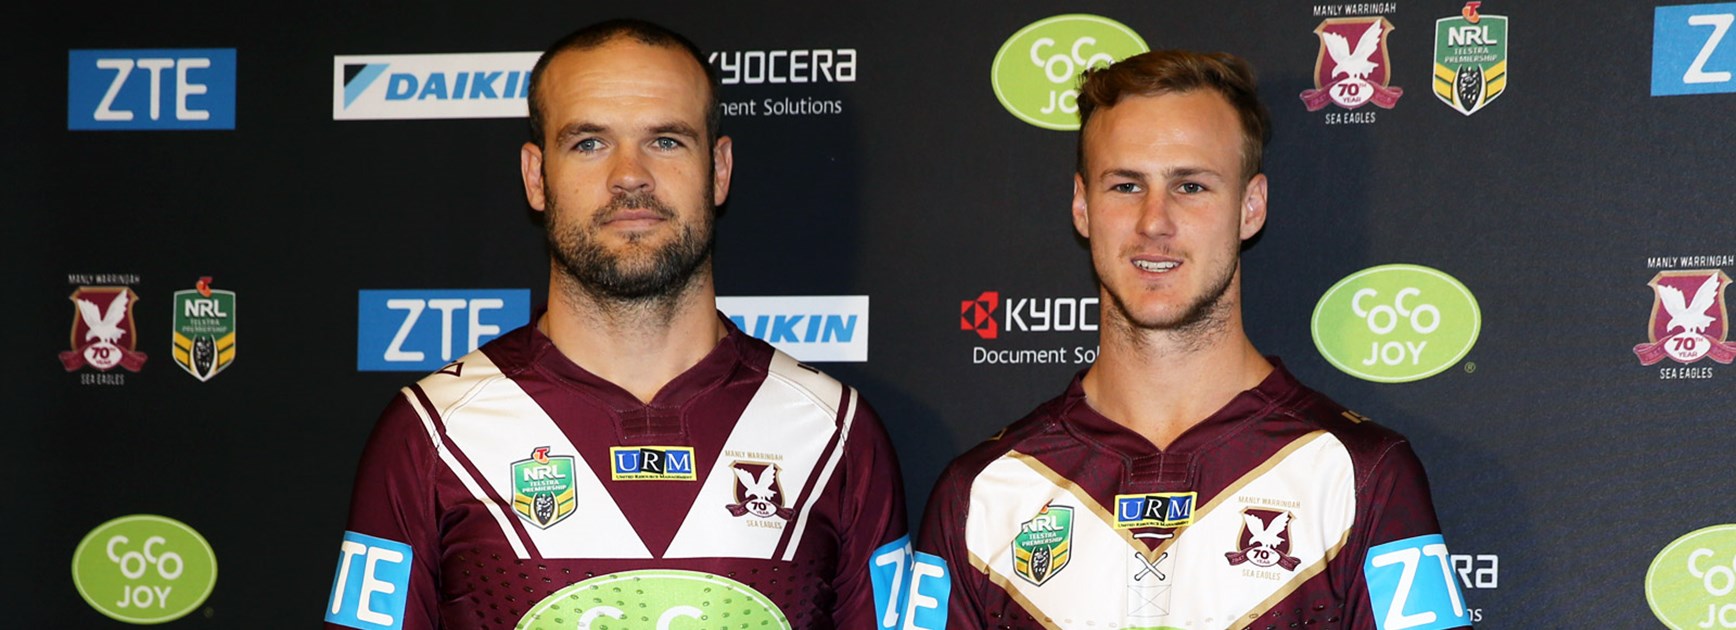 New Manly signing Nate Myles alongside halfback Daly Cherry-Evans in the club's 2016 jersey.